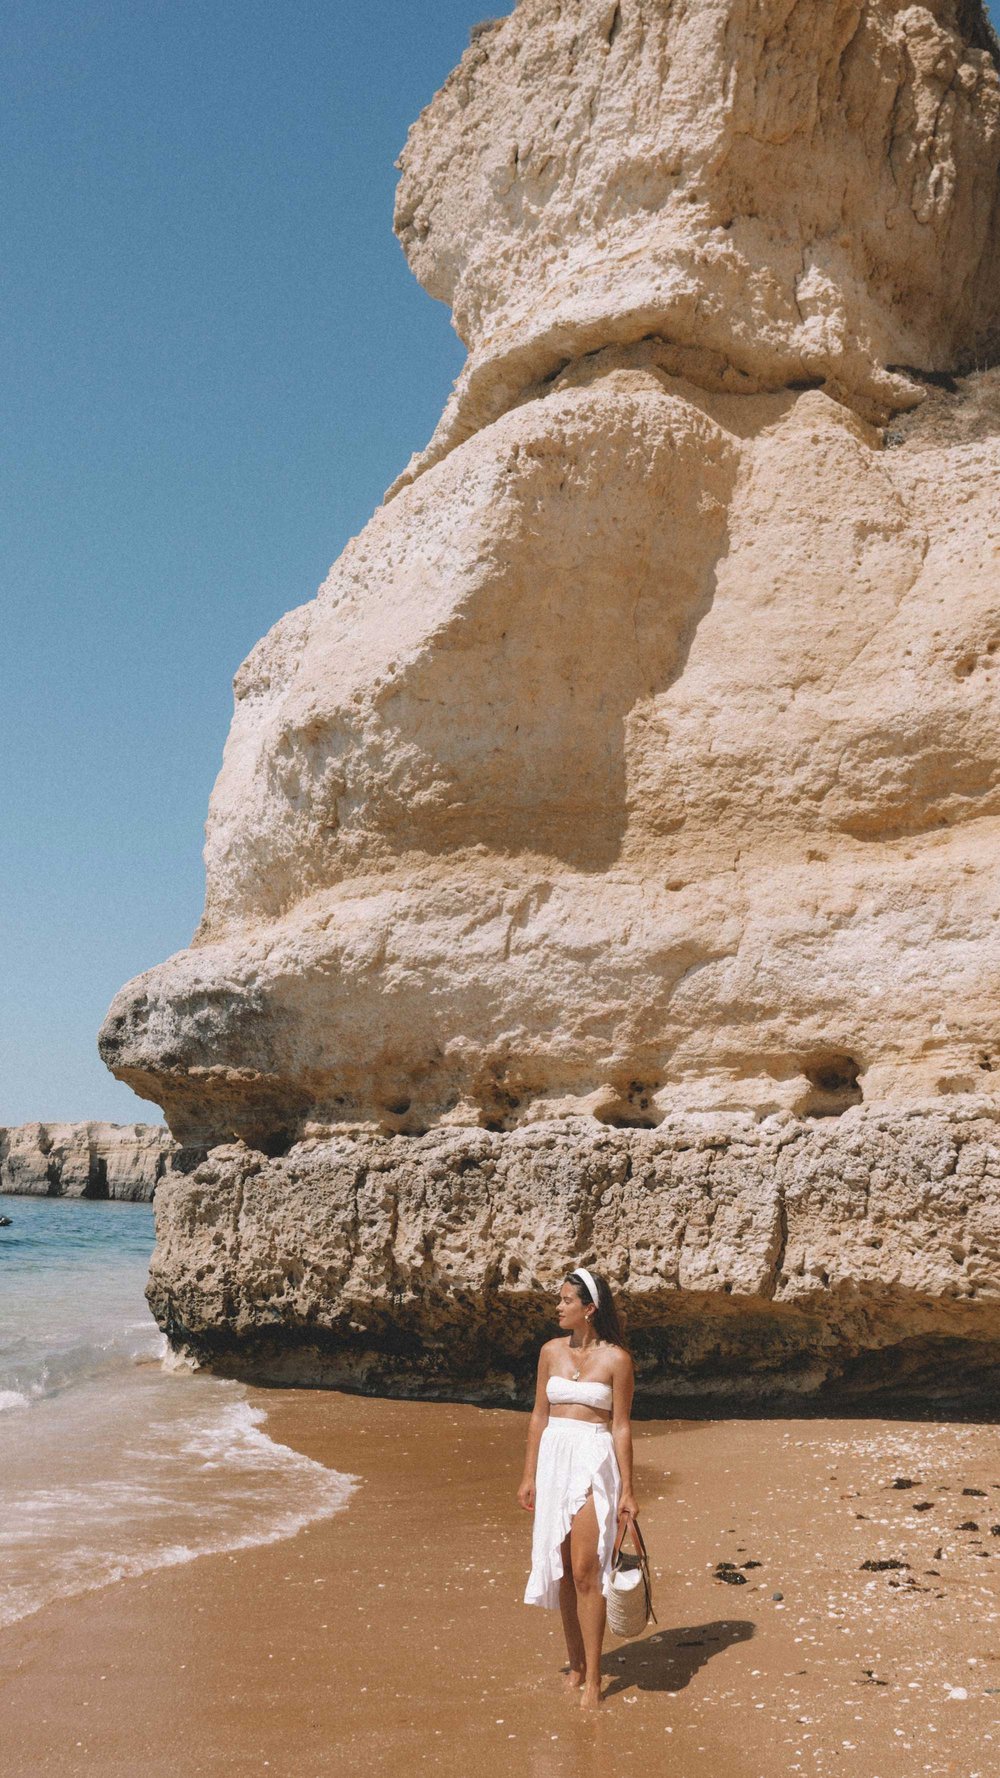 Summer Travel in Algarve, Portugal. Sarah Butler of @SarahChristine wearing cute summer beach outfit in sandy coves of Algarve, Portugal -1.jpg